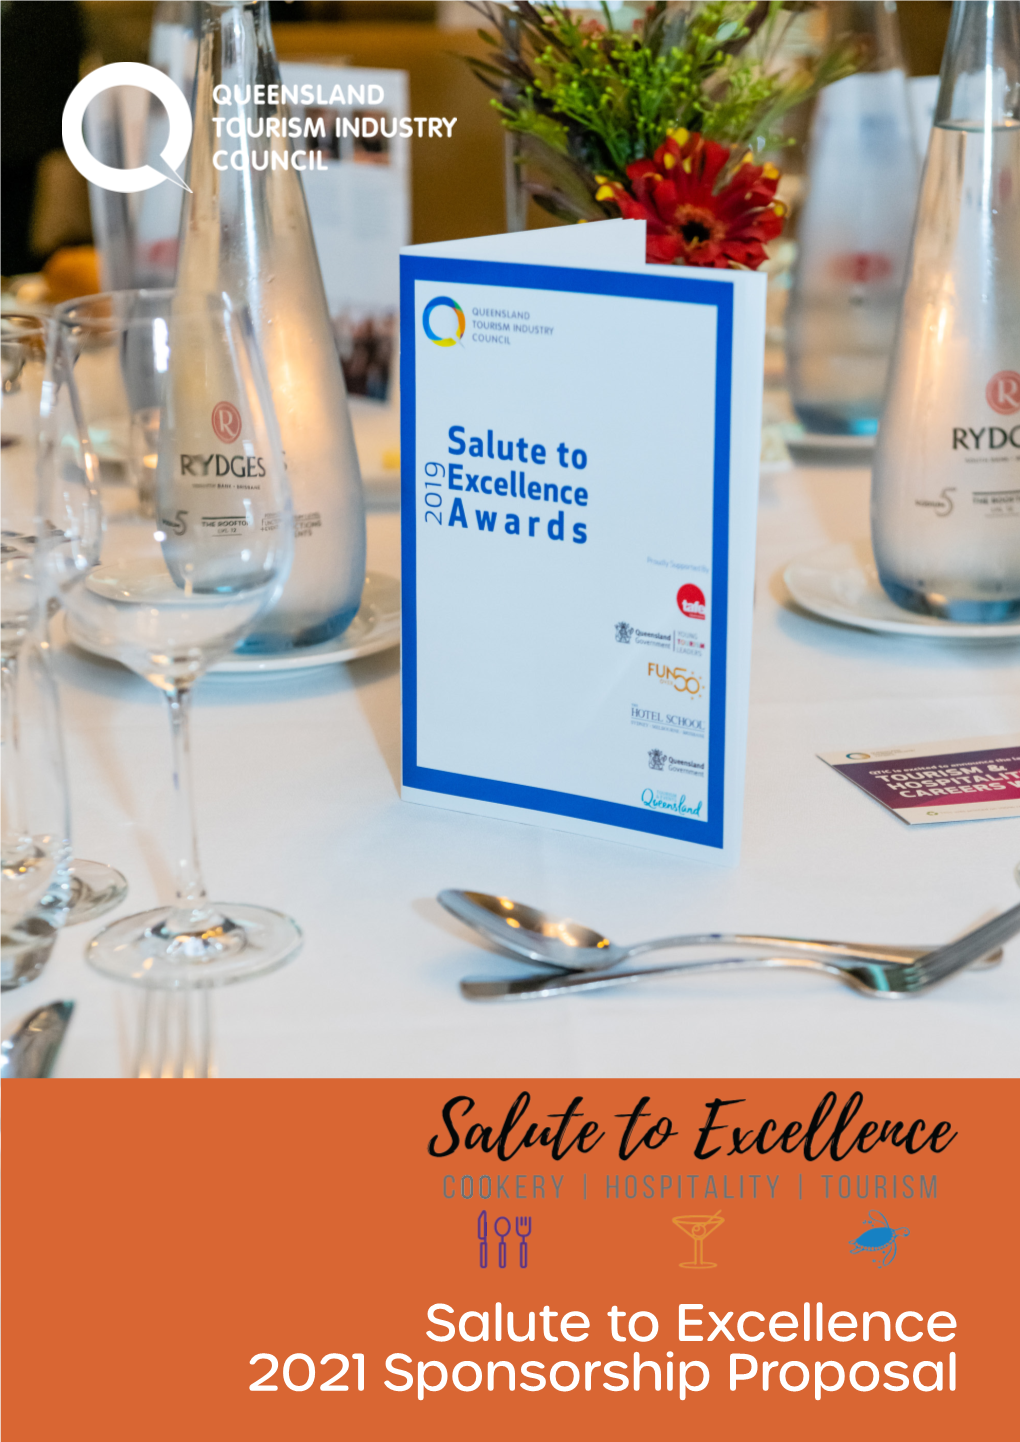 Salute to Excellence 2021 Sponsorship Proposal Queensland Tourism Industry Council (QTIC)